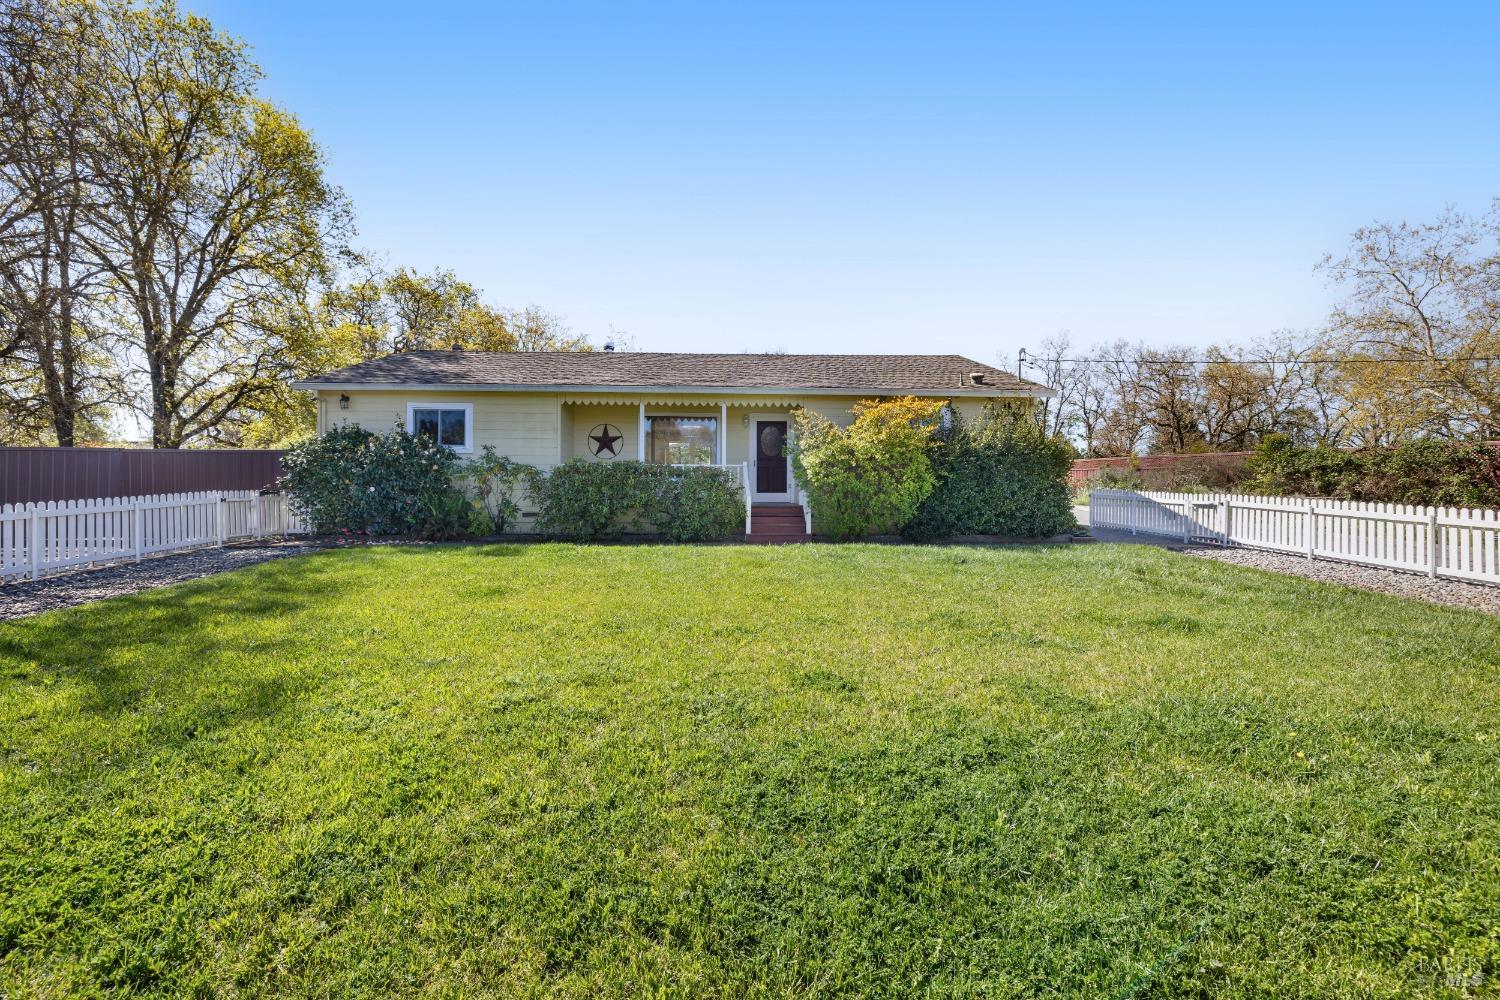 Photo of 3790 Selvage Rd in Santa Rosa, CA